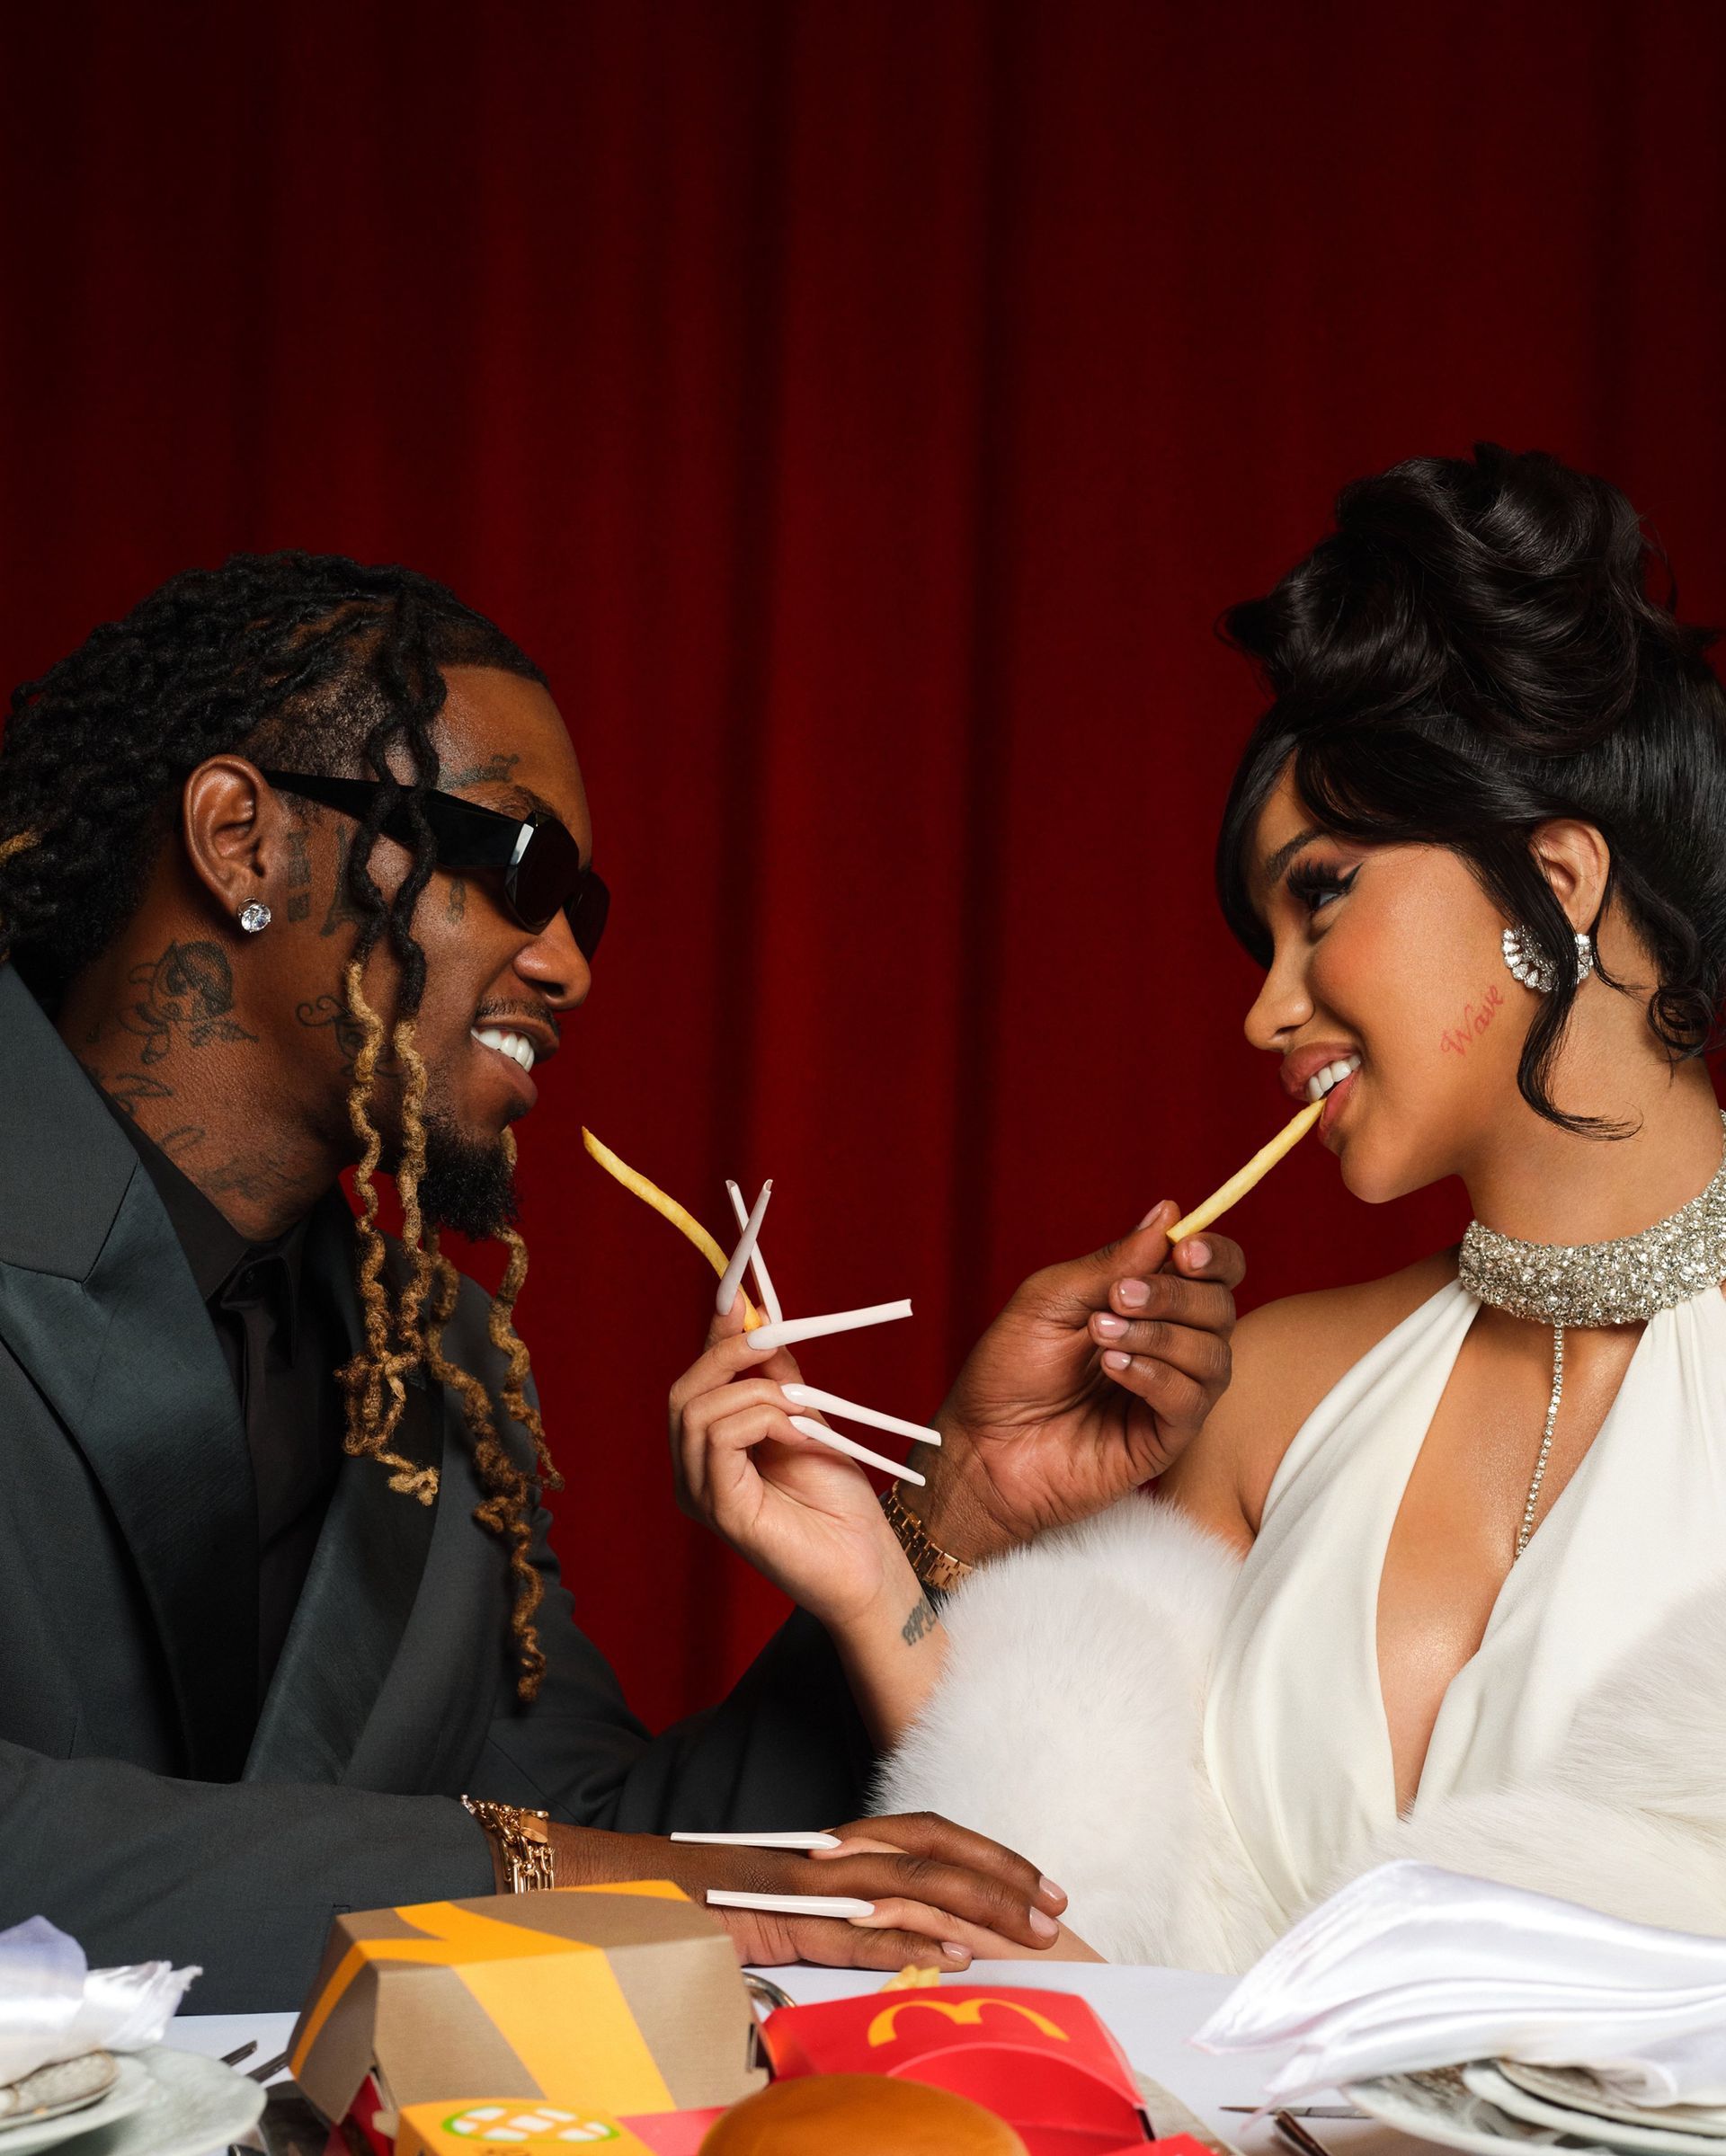 Cardi B and Offset’s McDonald’s meal has it all